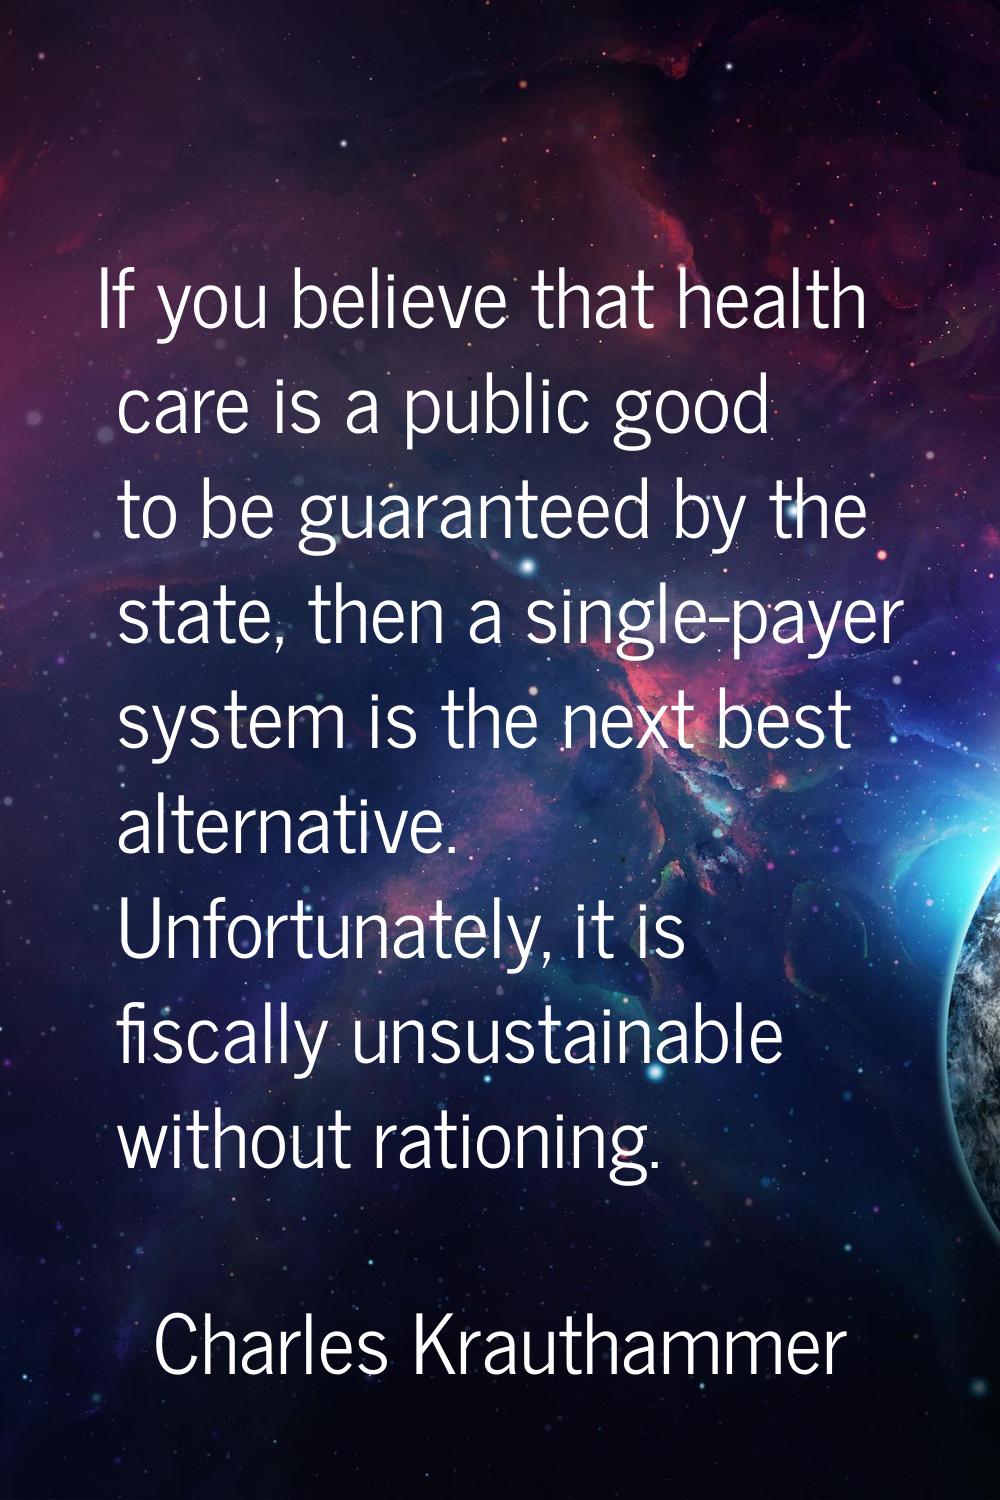 If you believe that health care is a public good to be guaranteed by the state, then a single-payer